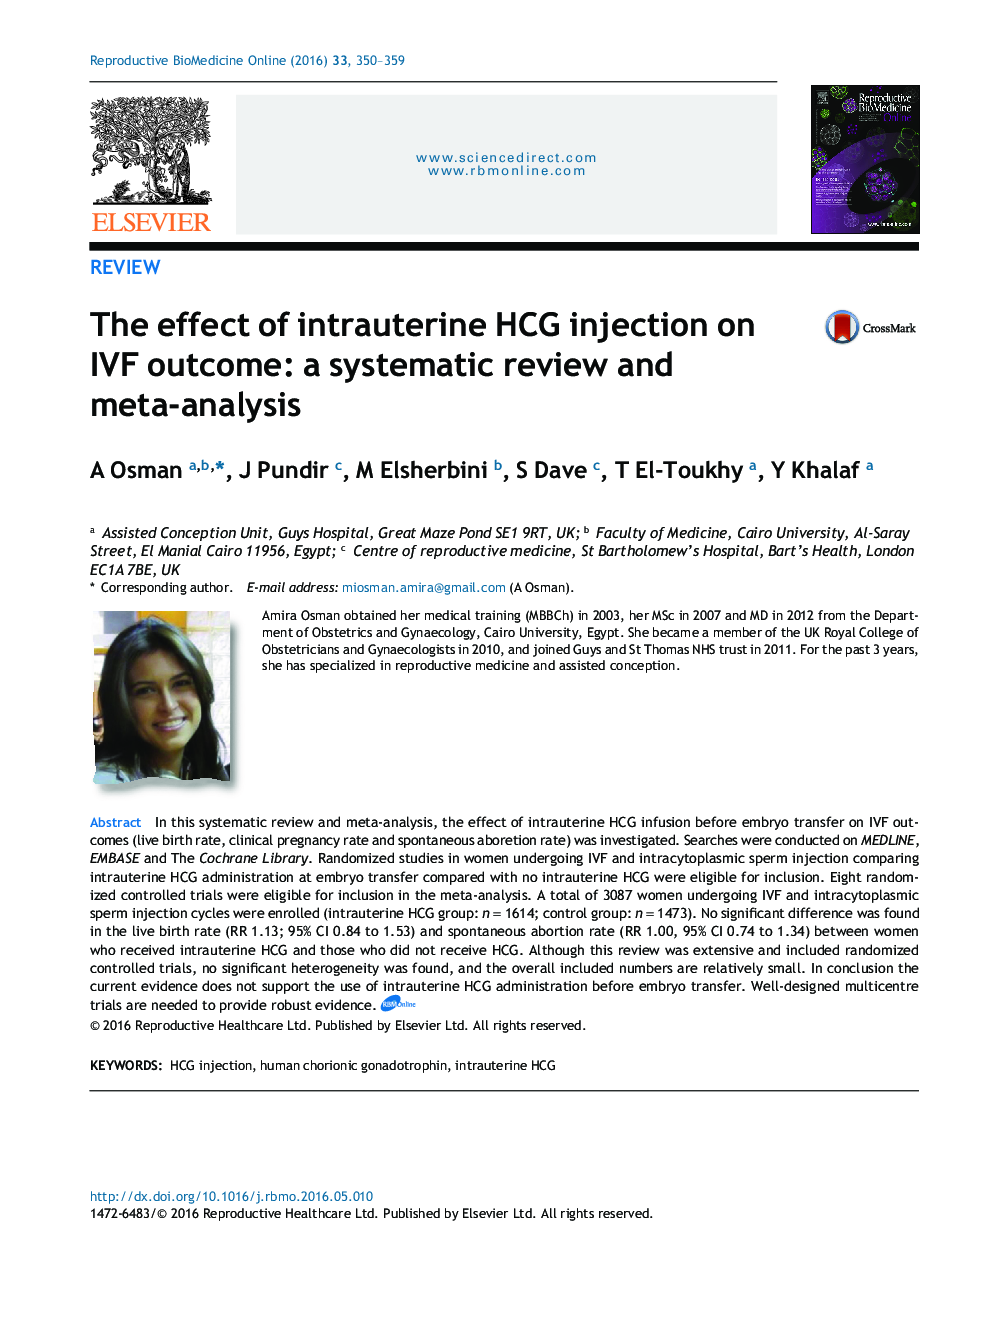 The effect of intrauterine HCG injection on IVF outcome: a systematic review and meta-analysis